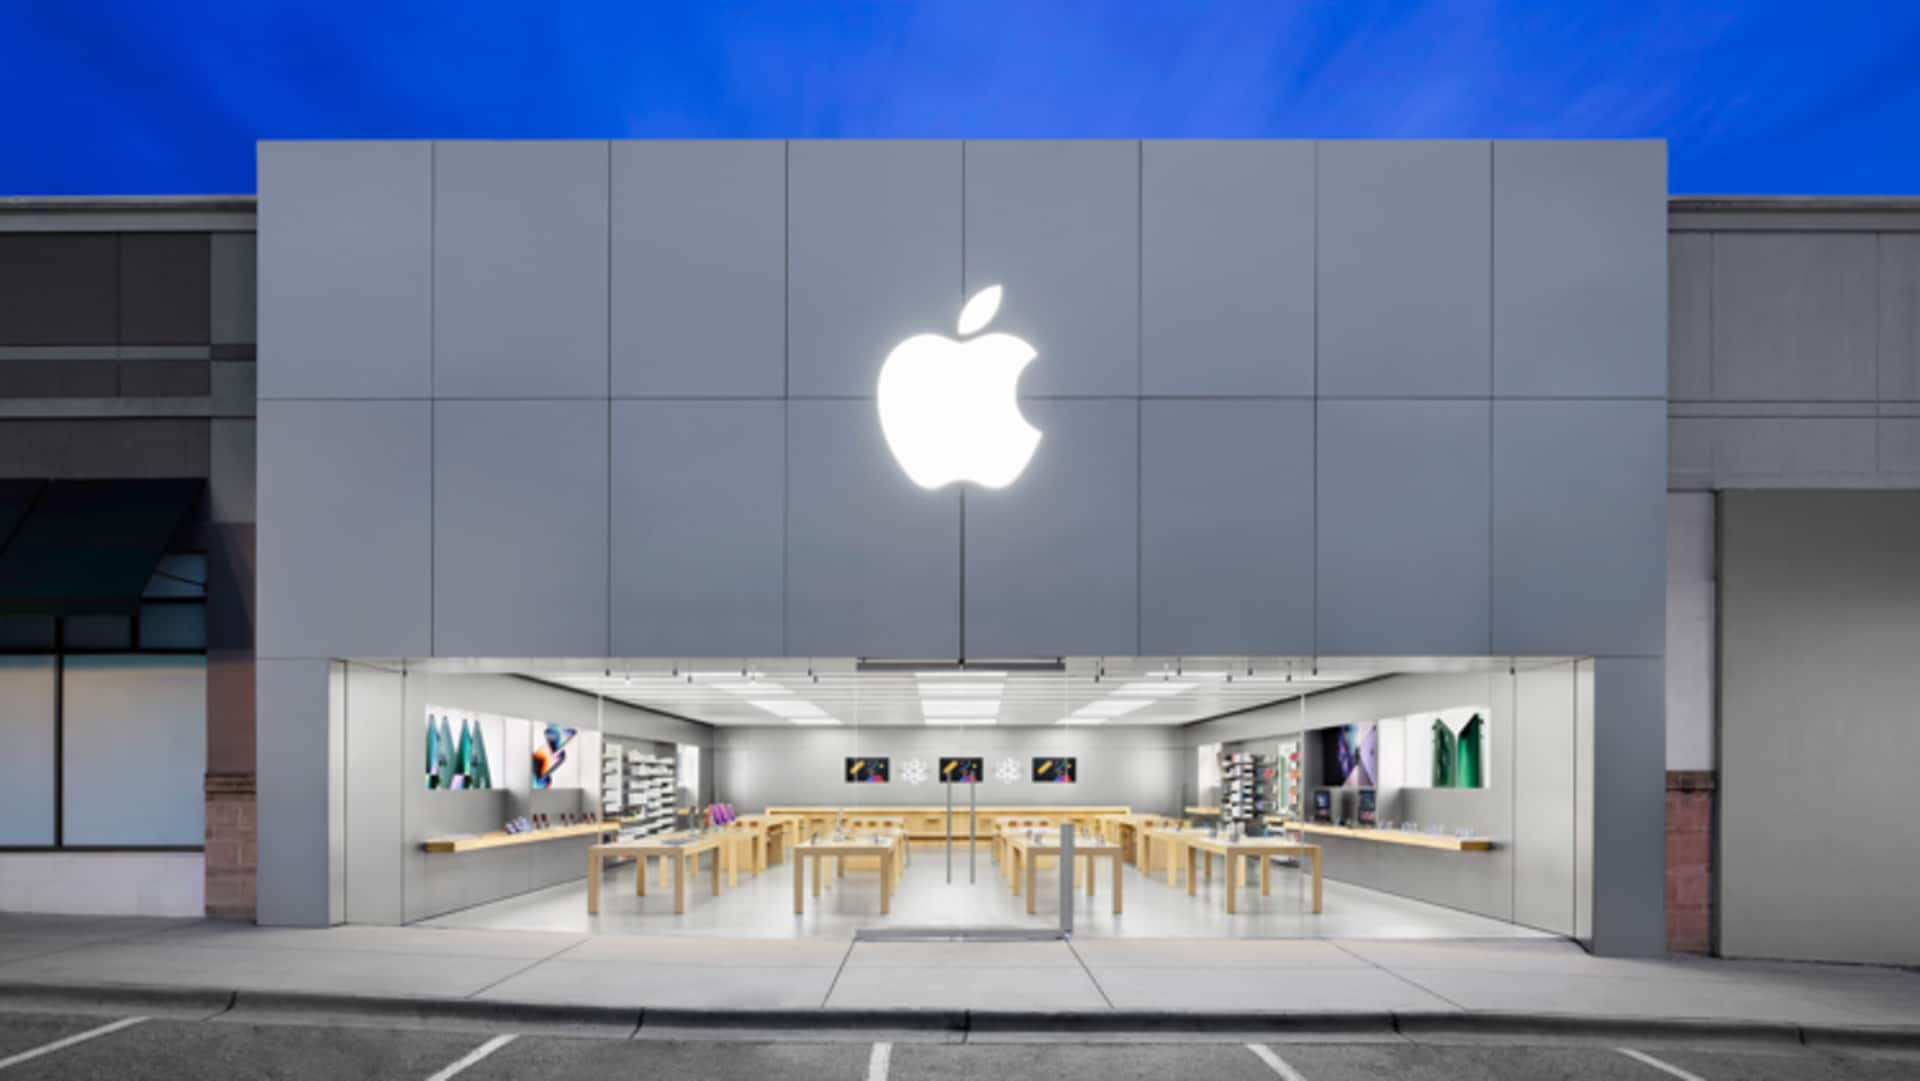 India's first-ever Apple store will be launched in Mumbai soon